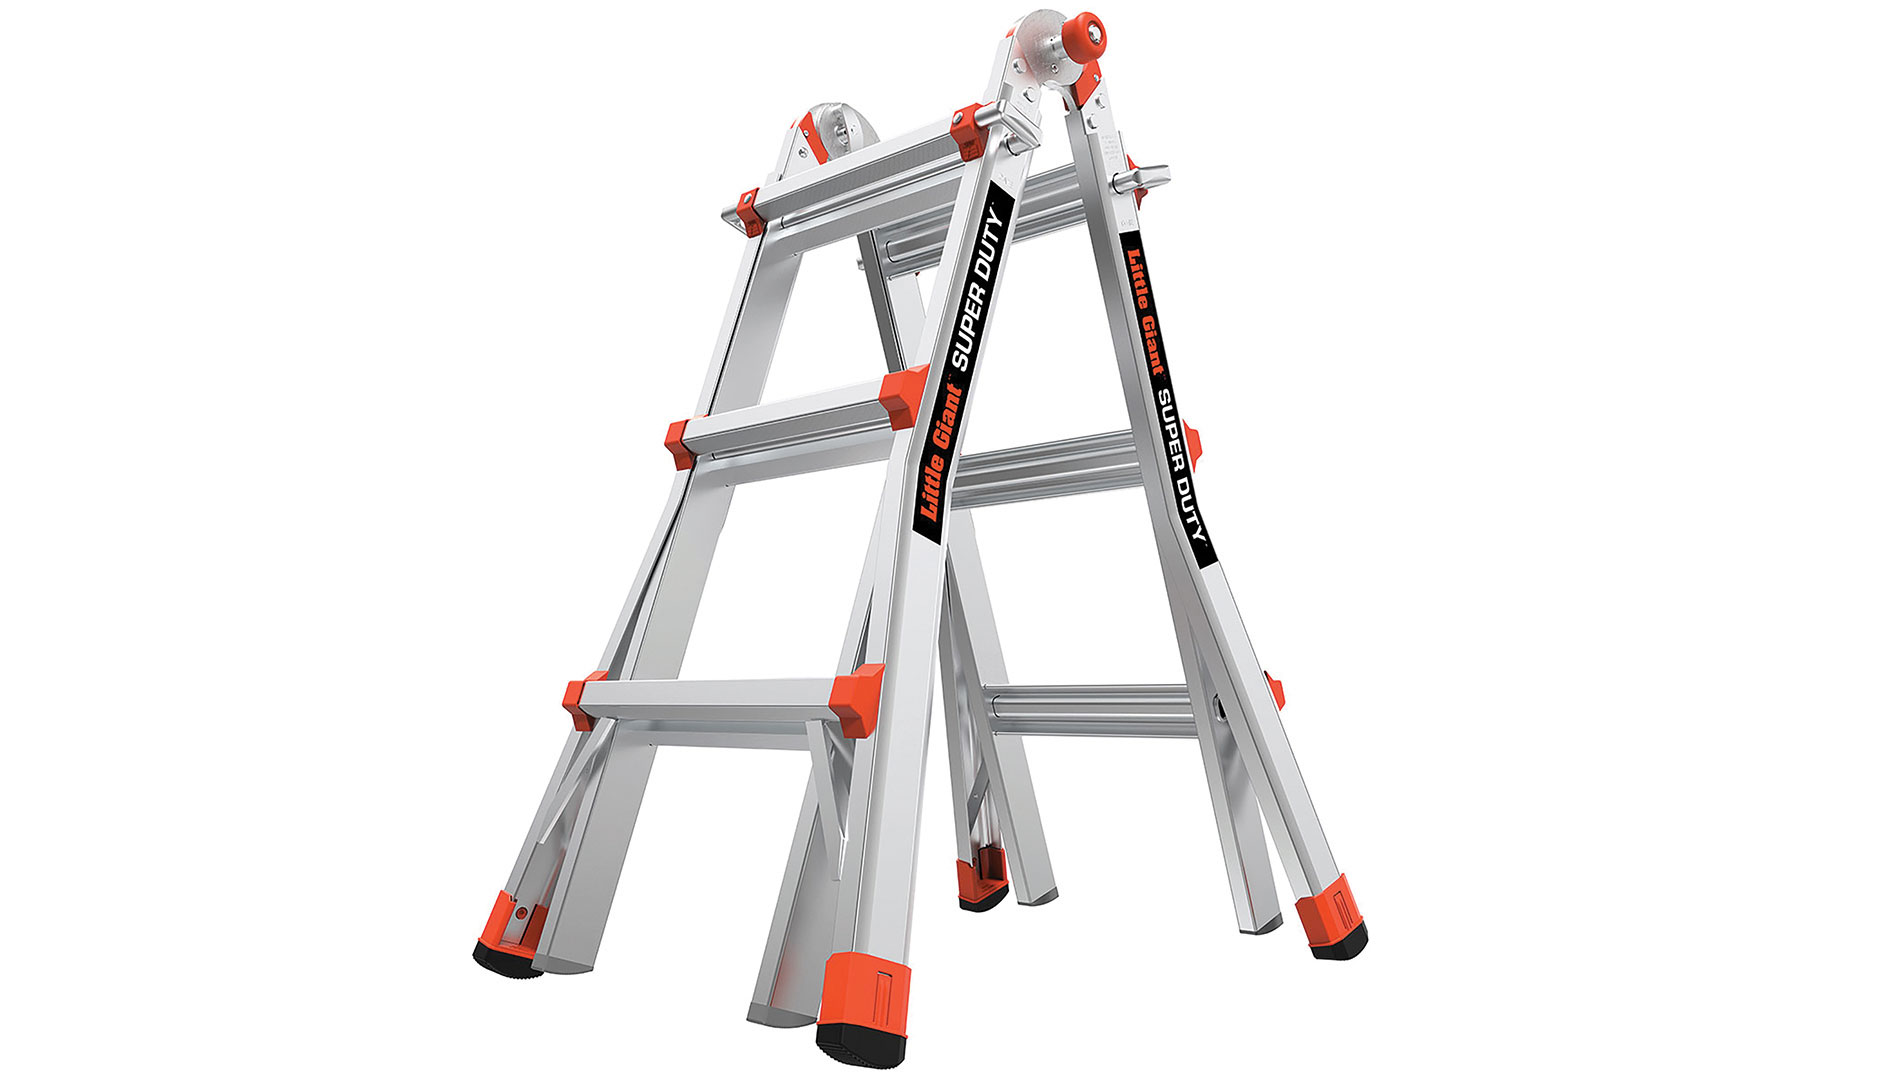 Gray and orange ladder. Image by Little Giant.